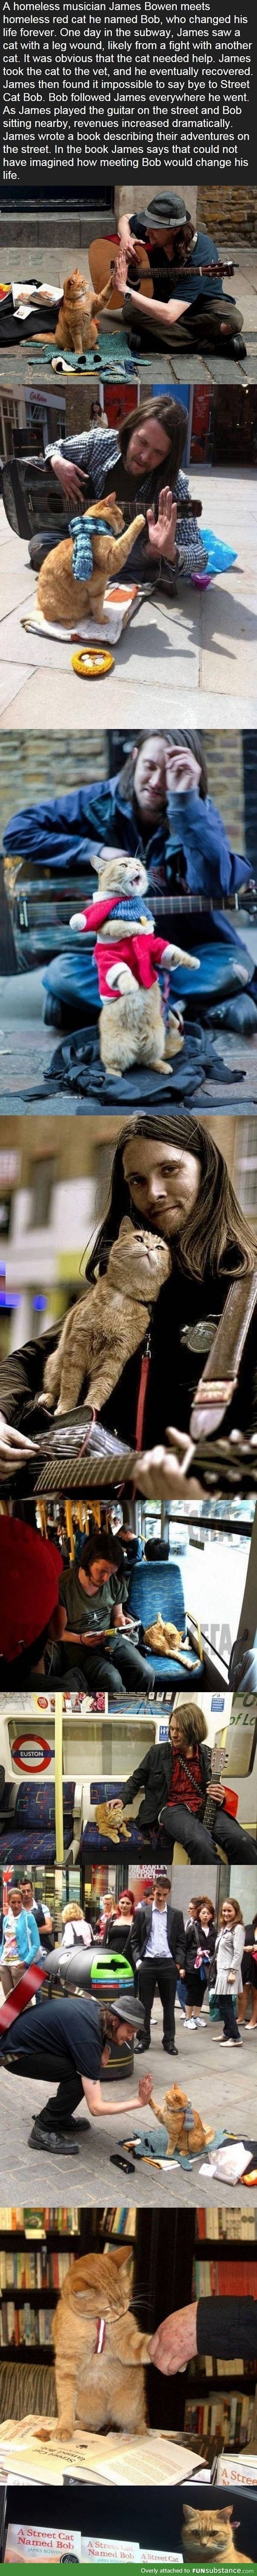 Homeless Musician and his Cat